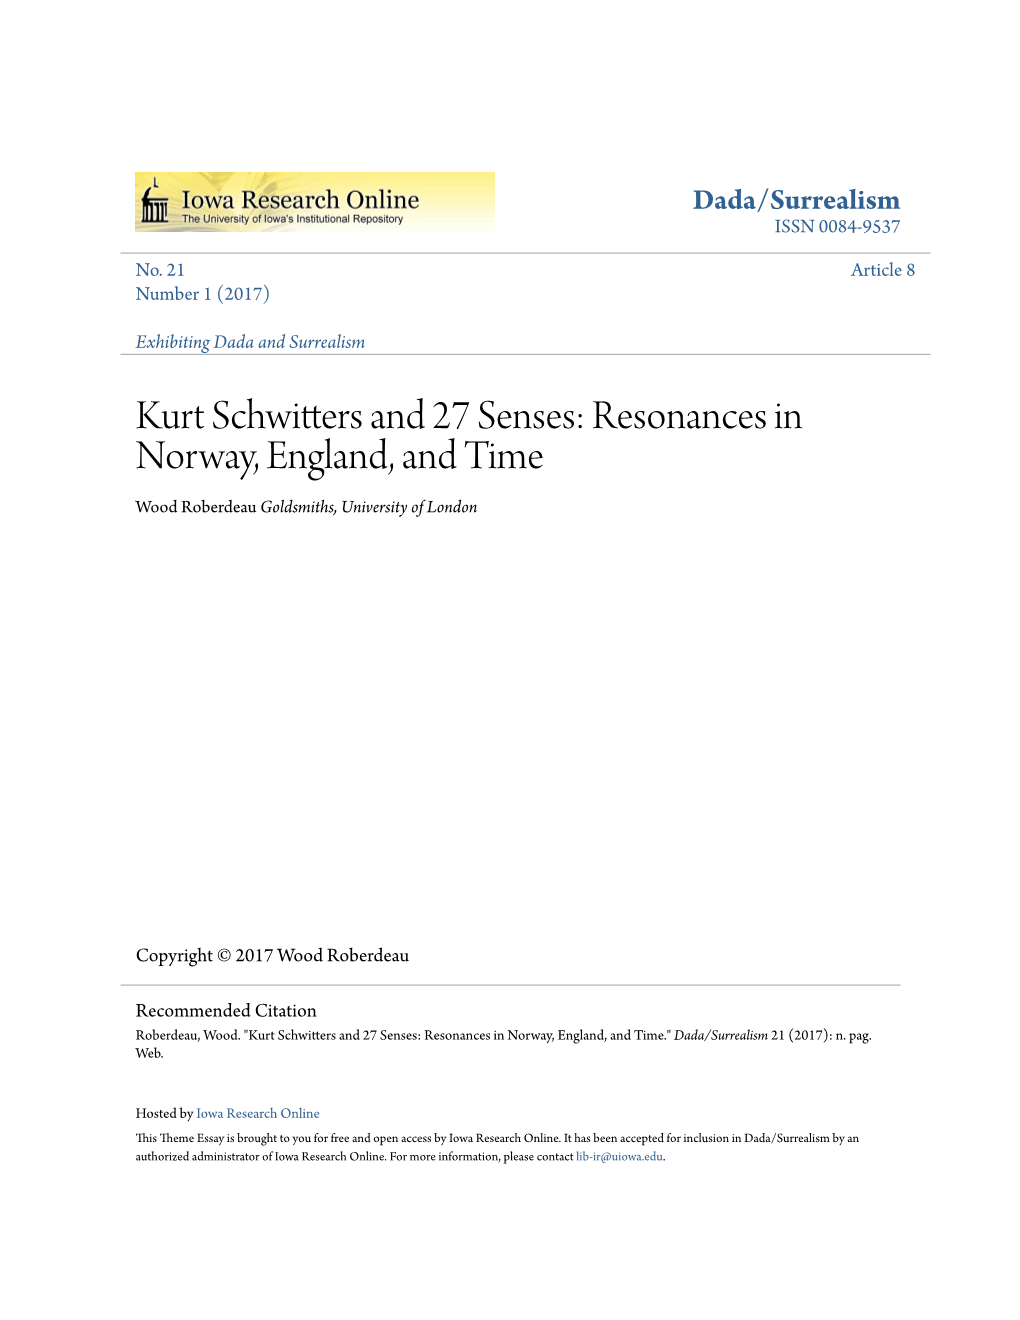 Kurt Schwitters and 27 Senses: Resonances in Norway, England, and Time Wood Roberdeau Goldsmiths, University of London